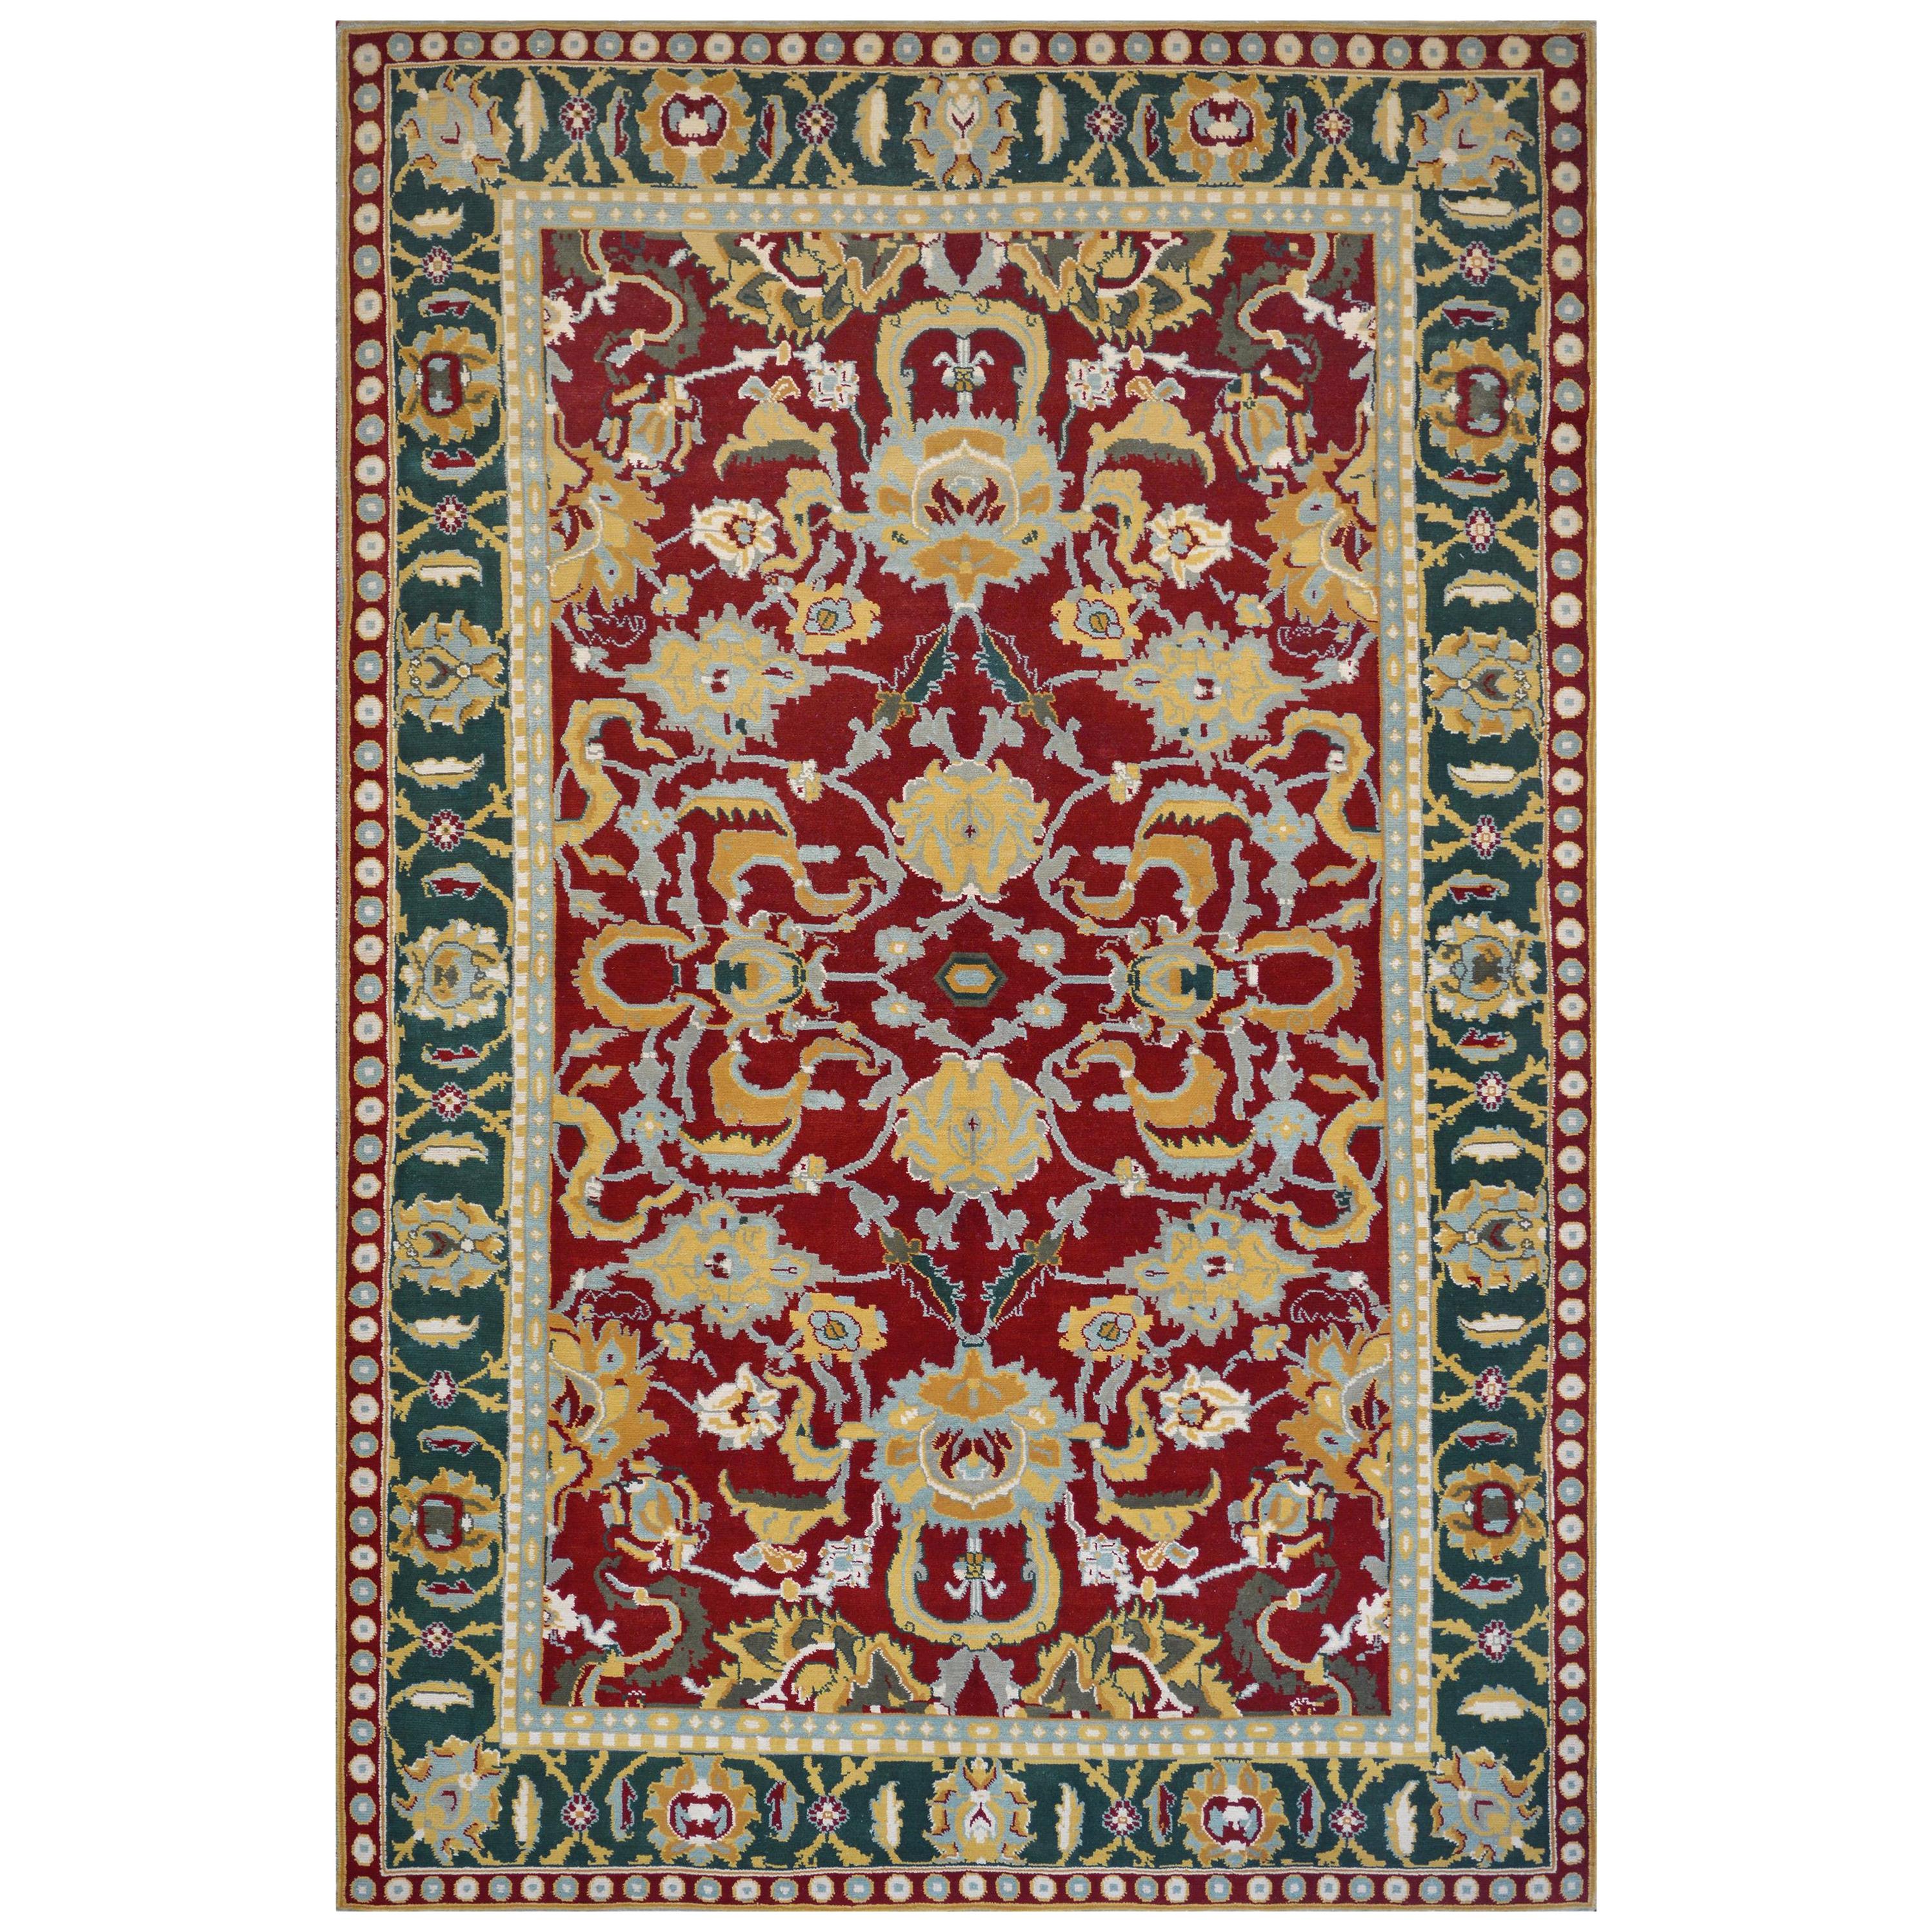 New 100% Wool Handwoven Agra-inspired Rug For Sale